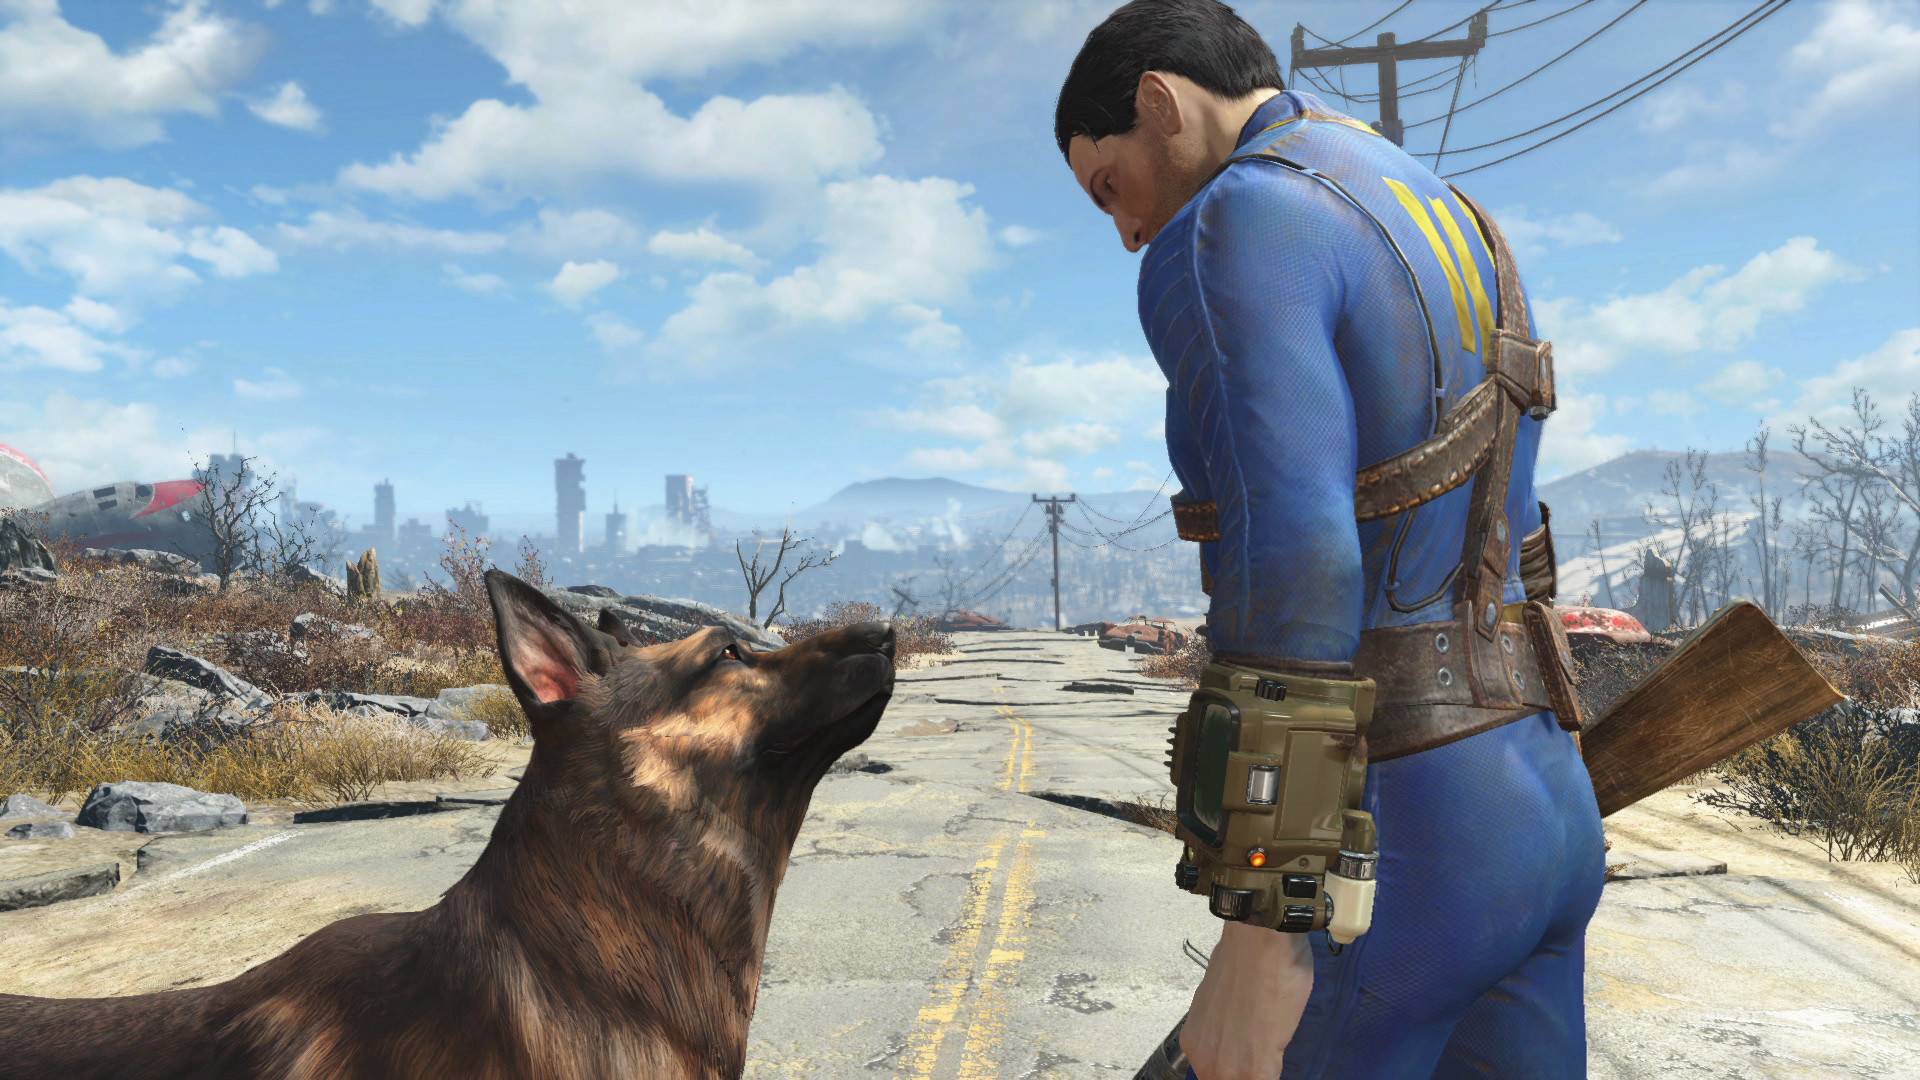 Best open-world games: The Sole Survivors in Fallout 4 looking at Dogmeat, his German Shepherd, as they walk down a dilapidated road.